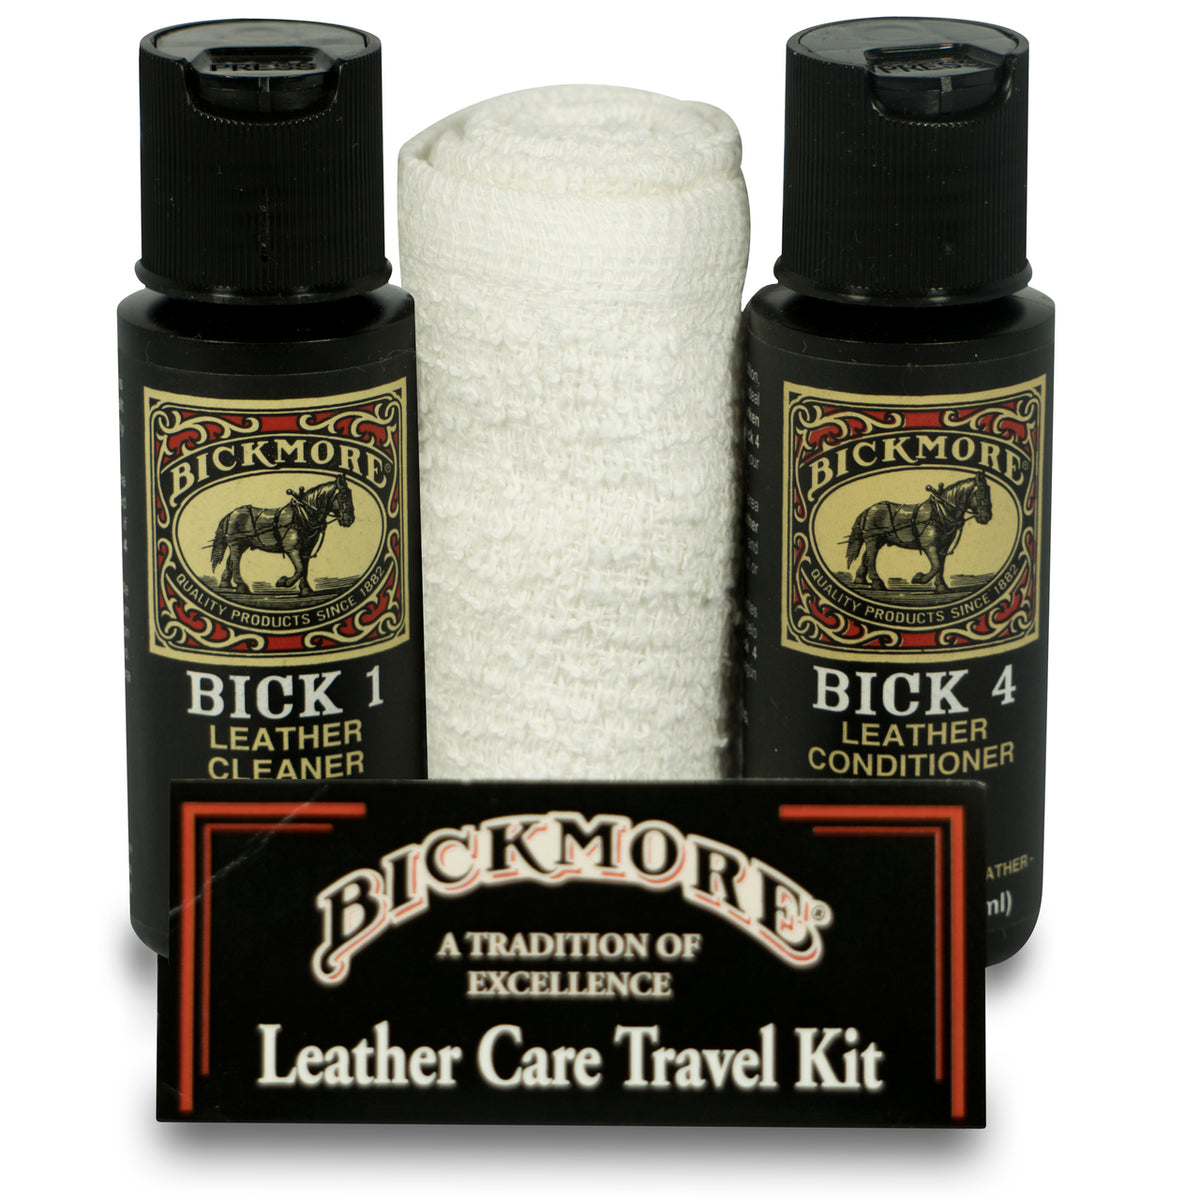 Bickmore Leather Conditioner (BICK4) - OUR FAVORITE!